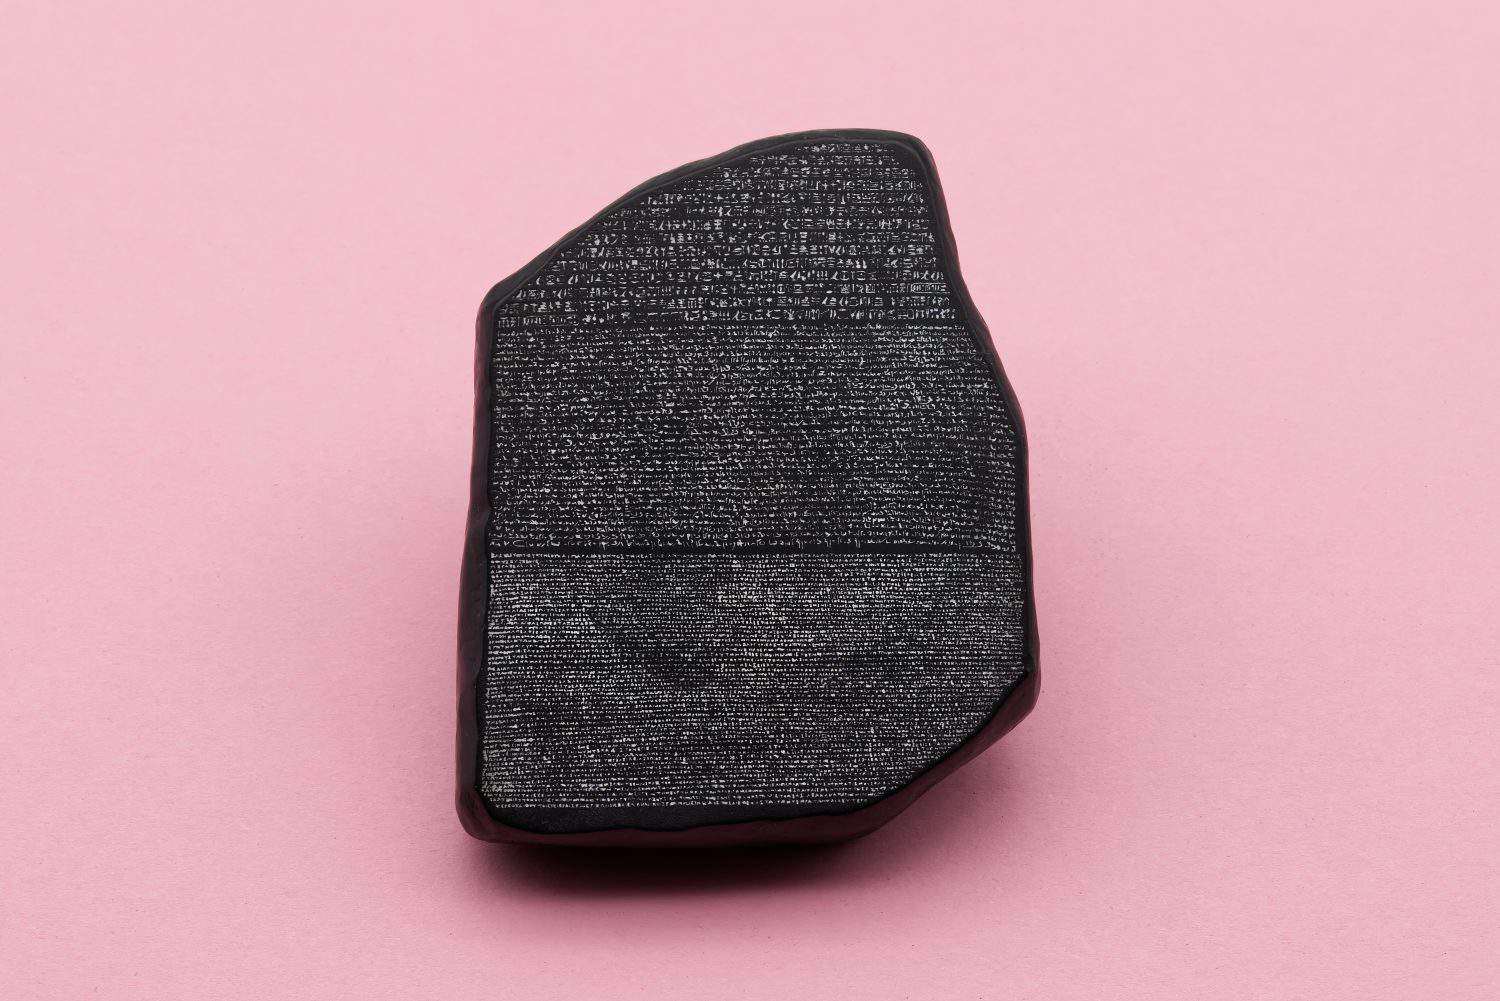 The Rosetta Stone model isolated on pink background.